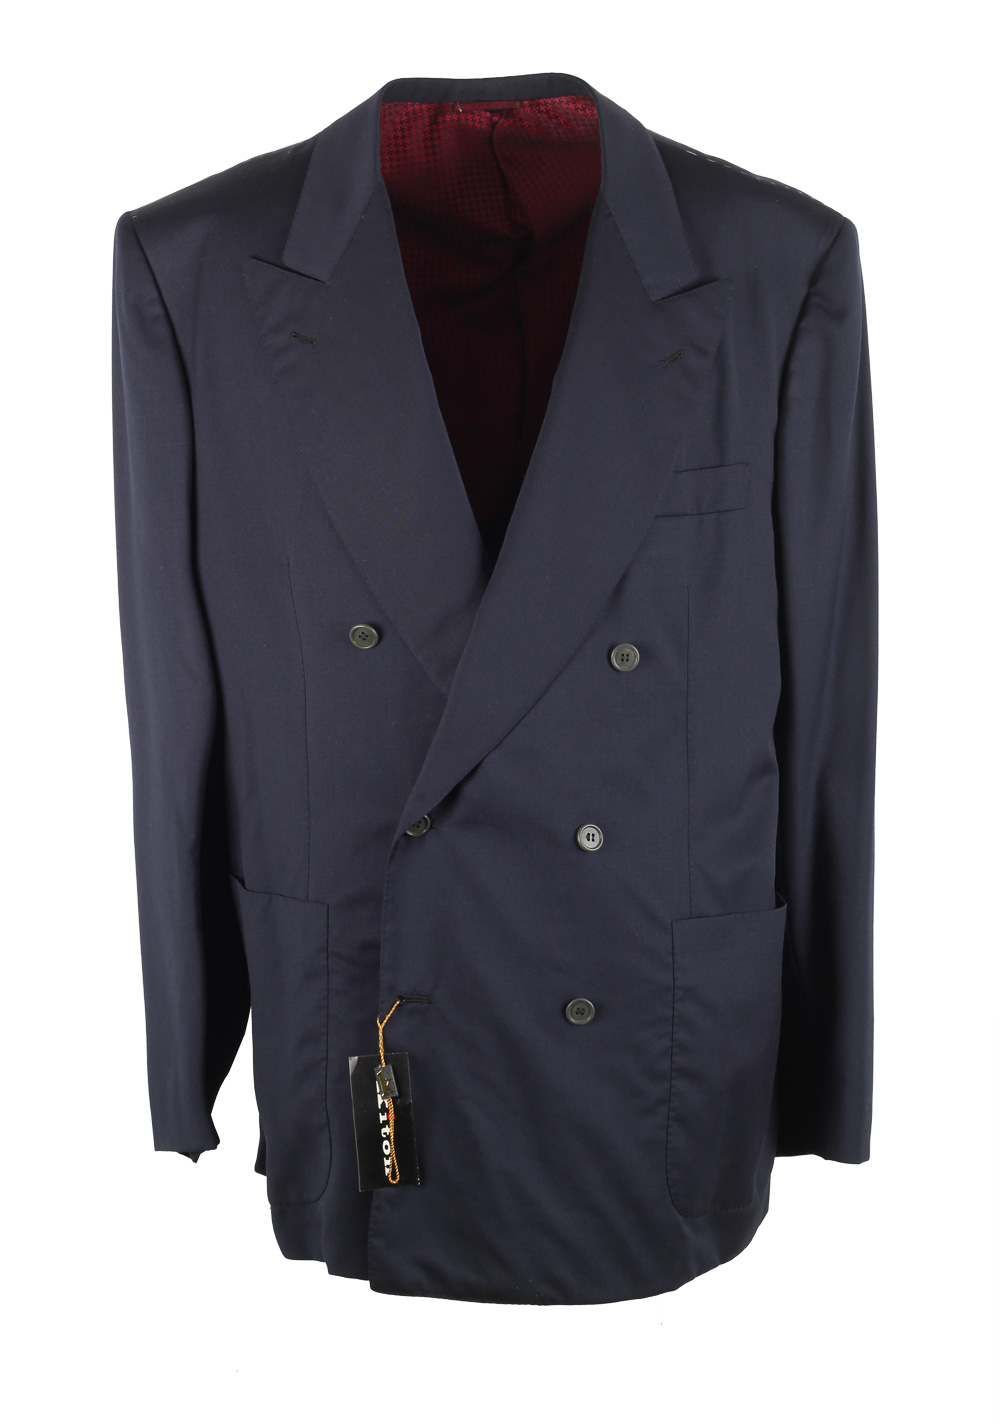 Kiton Blue Double Breasted Sport Coat Size 56 / 46R U.S. | Costume Limité